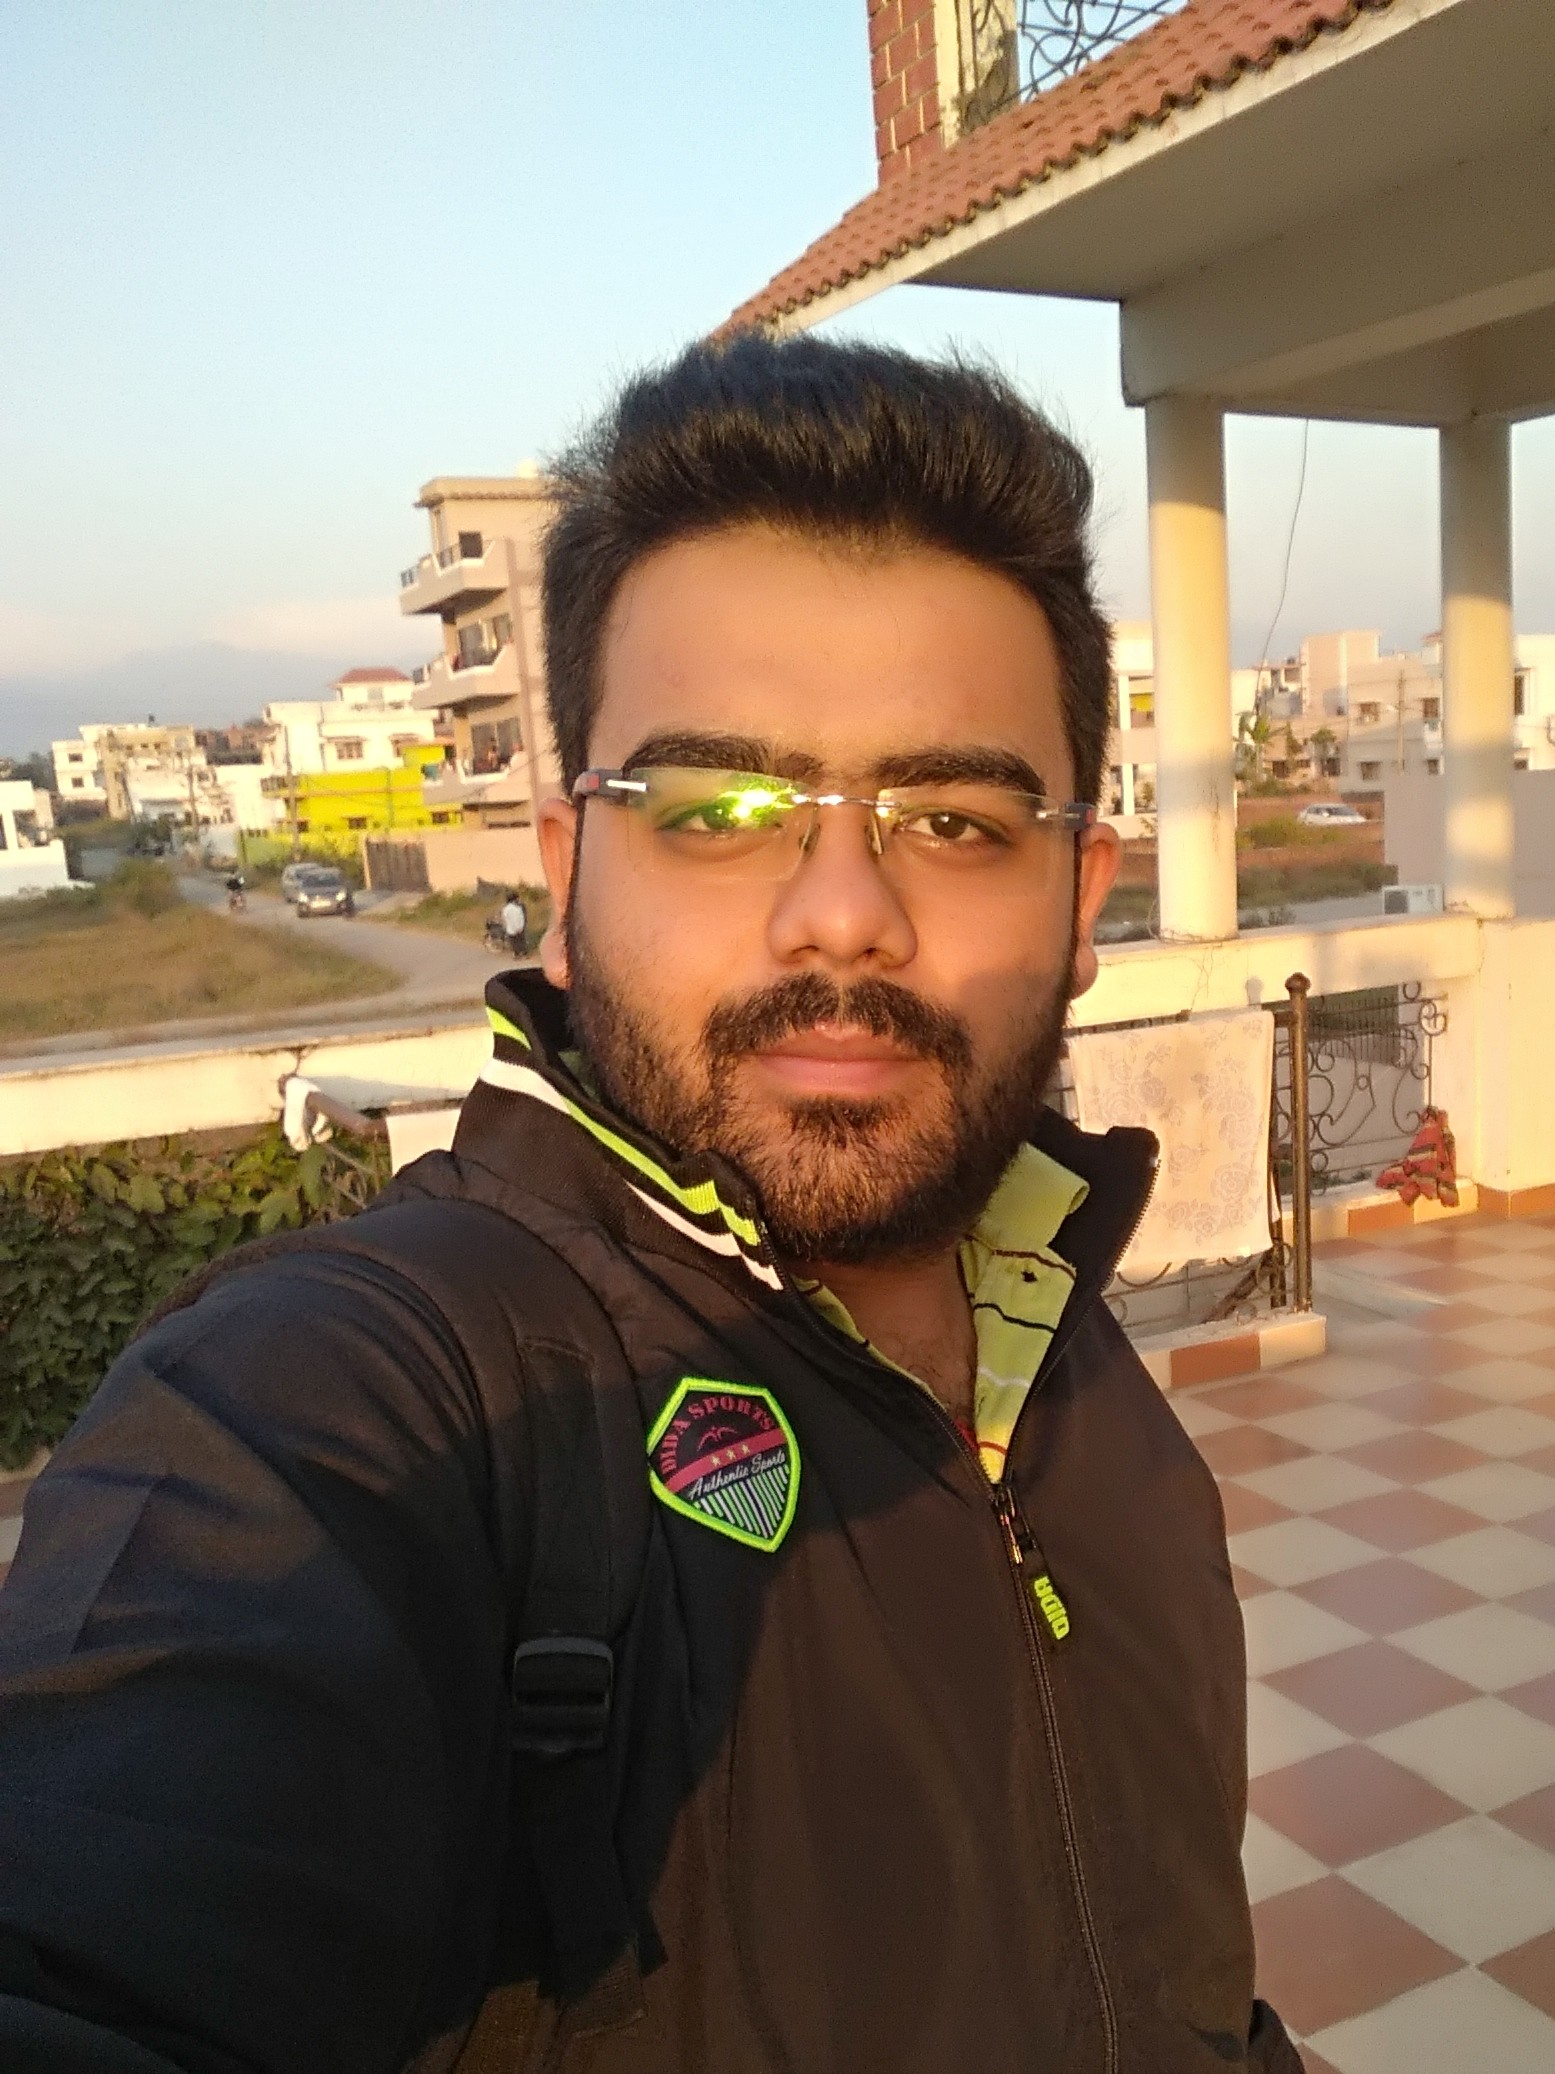 Franchise Owner - Prateek's story, professional experience and links.